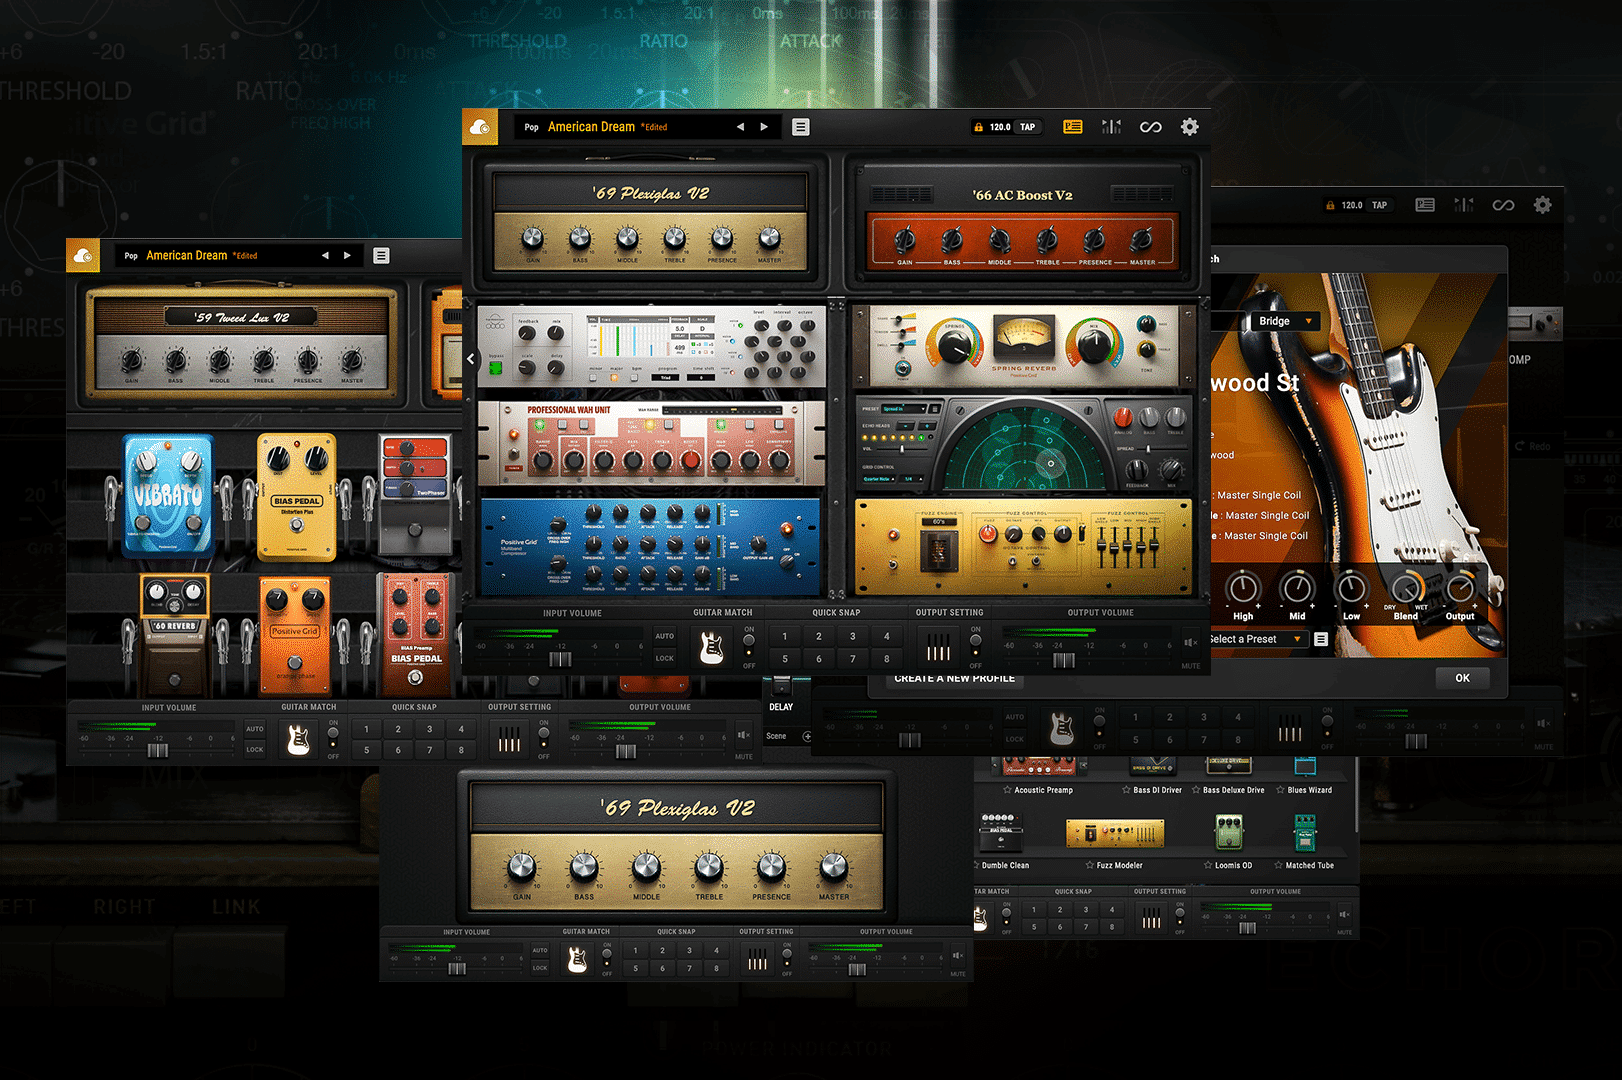 Positive Grid Releases BIAS FX 2 Guitar Amp and Effects Processor Featuring Guitar Match Emulation